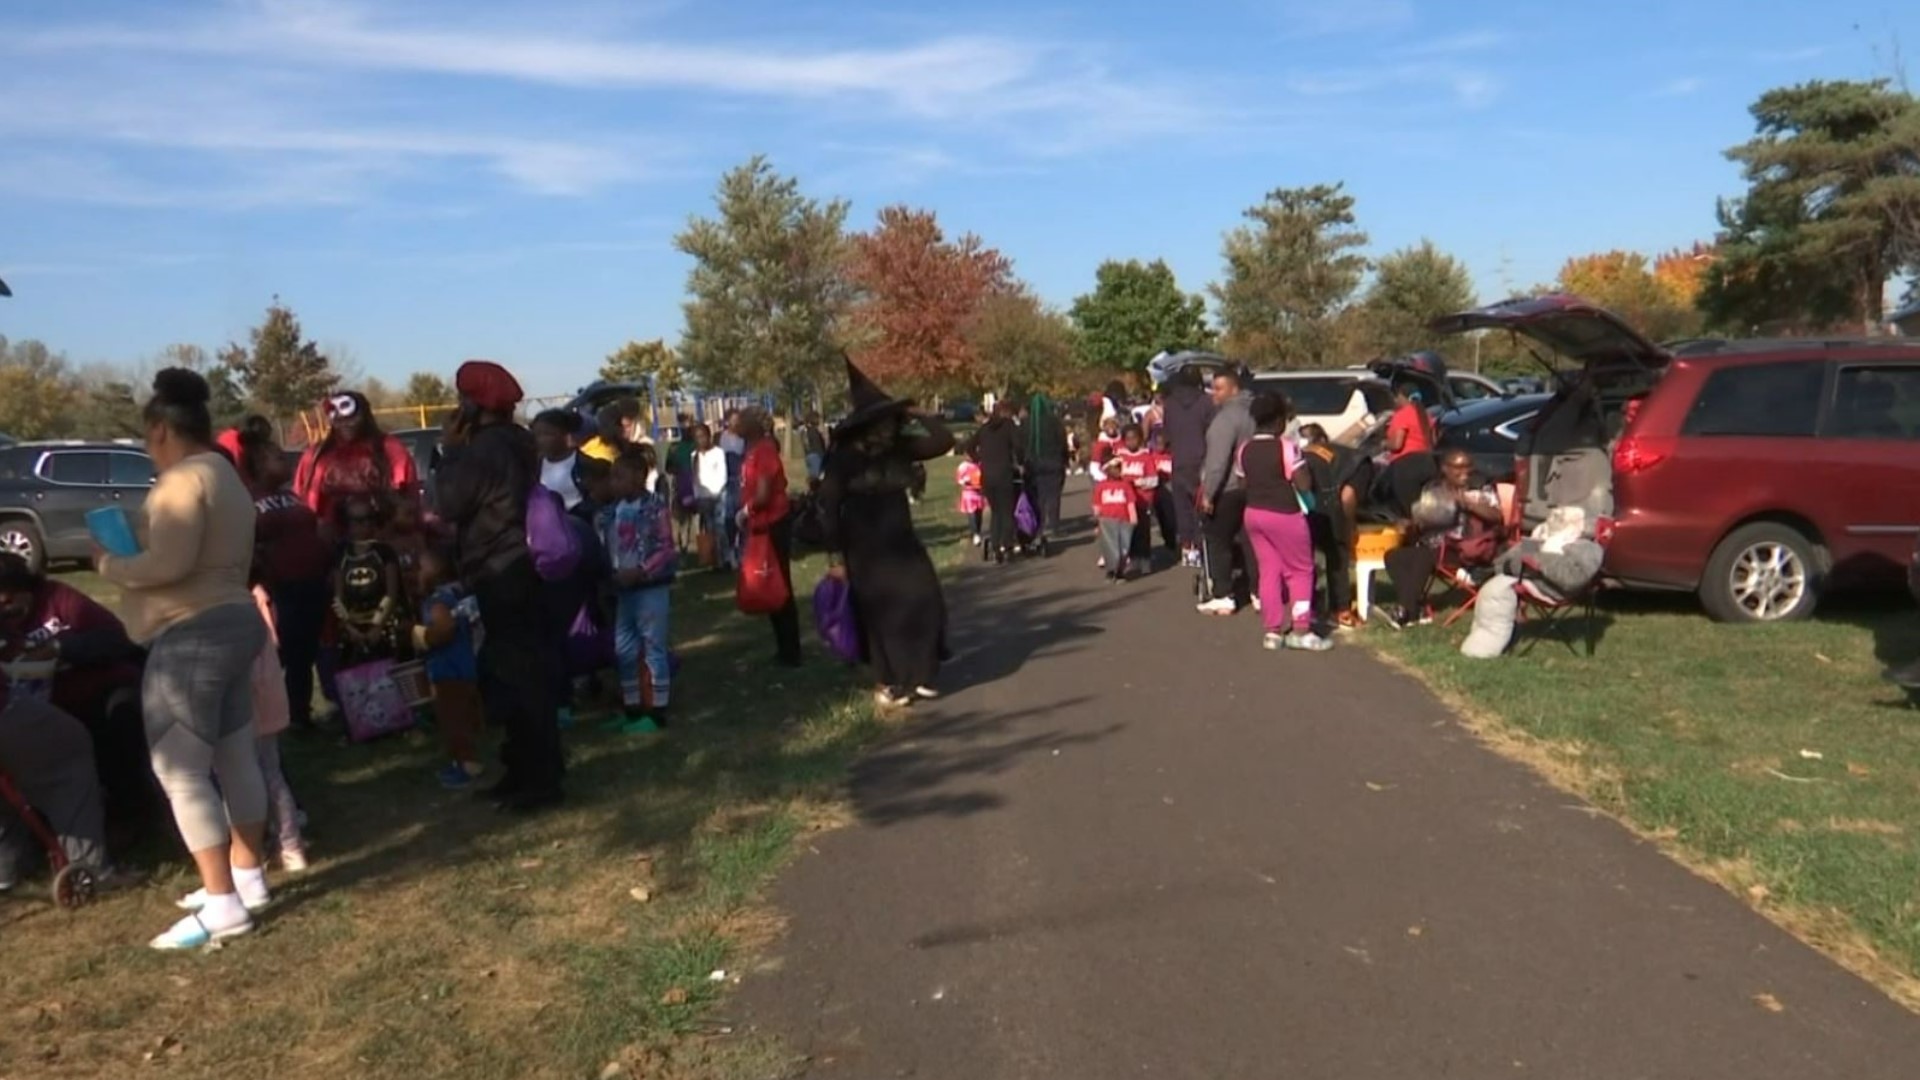 If you drove past Maloney Park on Saturday, it was filled with spooks and open trunks full of candy for We Are Linden’s third annual Trunk or Treat.